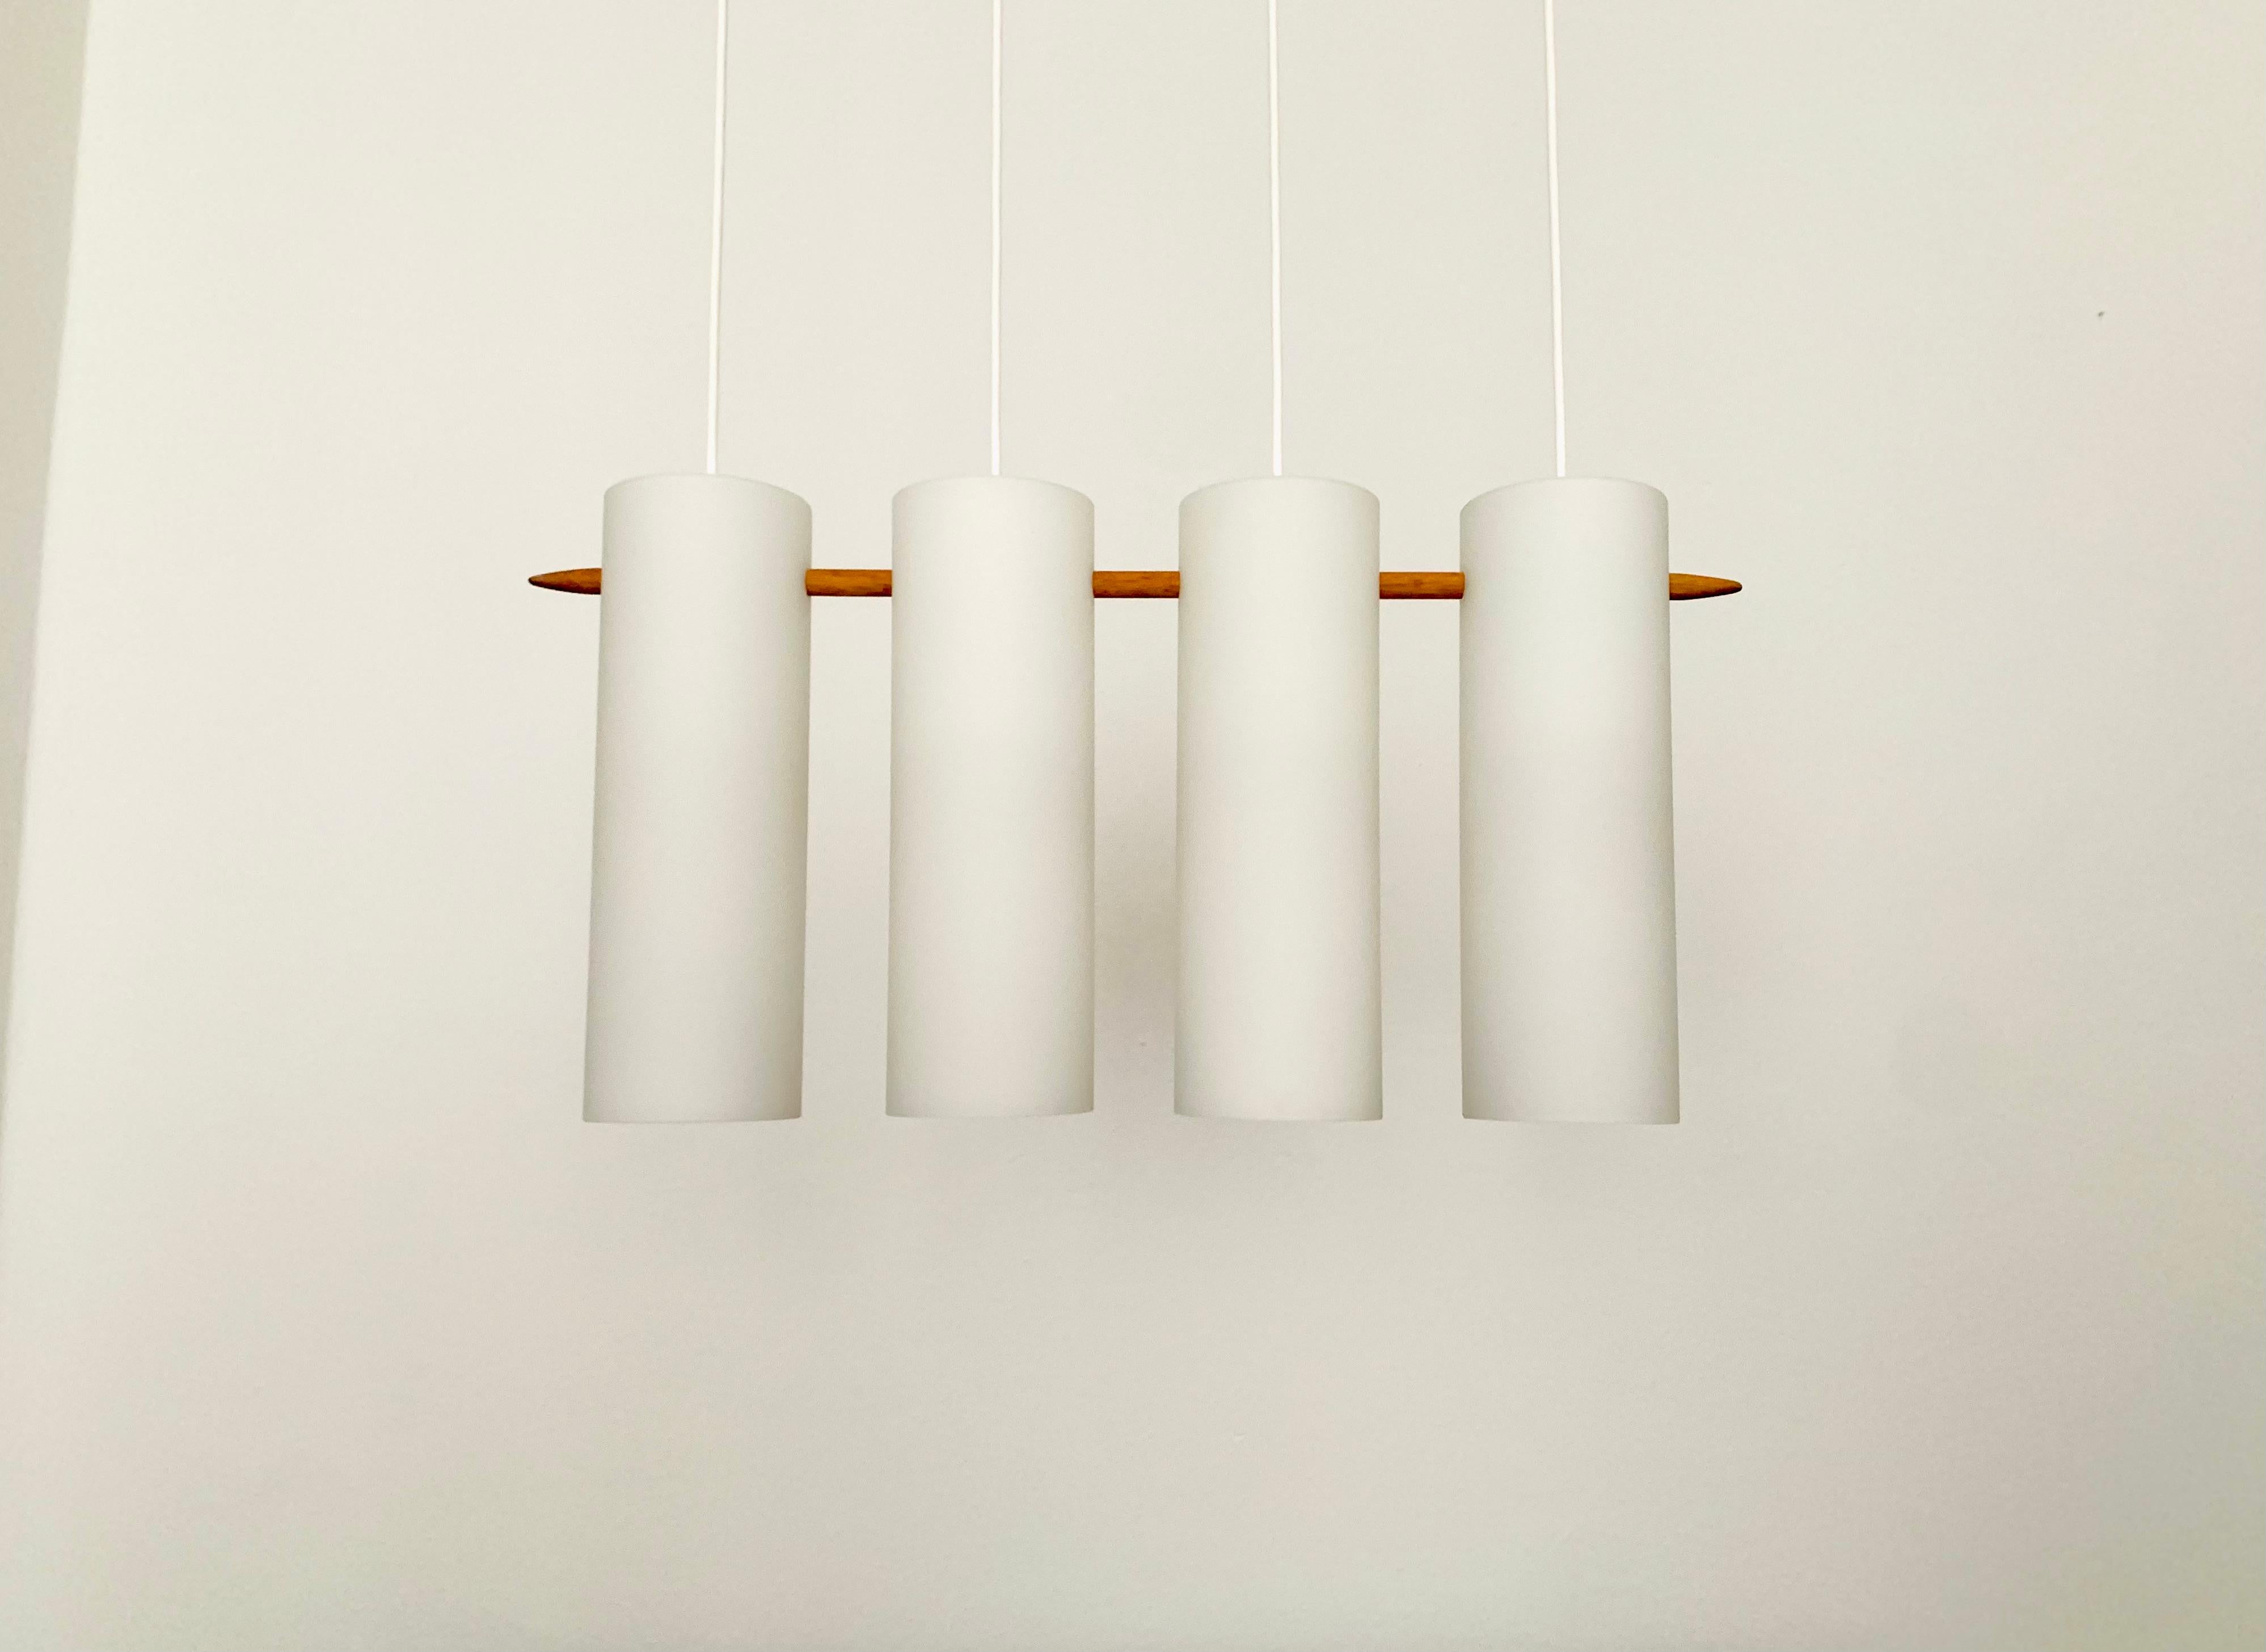 Wonderful Swedish opal glass pendant lamp from the 1960s.
Great and exceptionally minimalistic design with a fantastically elegant look.
Very nice details like the oak stick.

Manufacturer: Luxus
Design: Uno and Östen